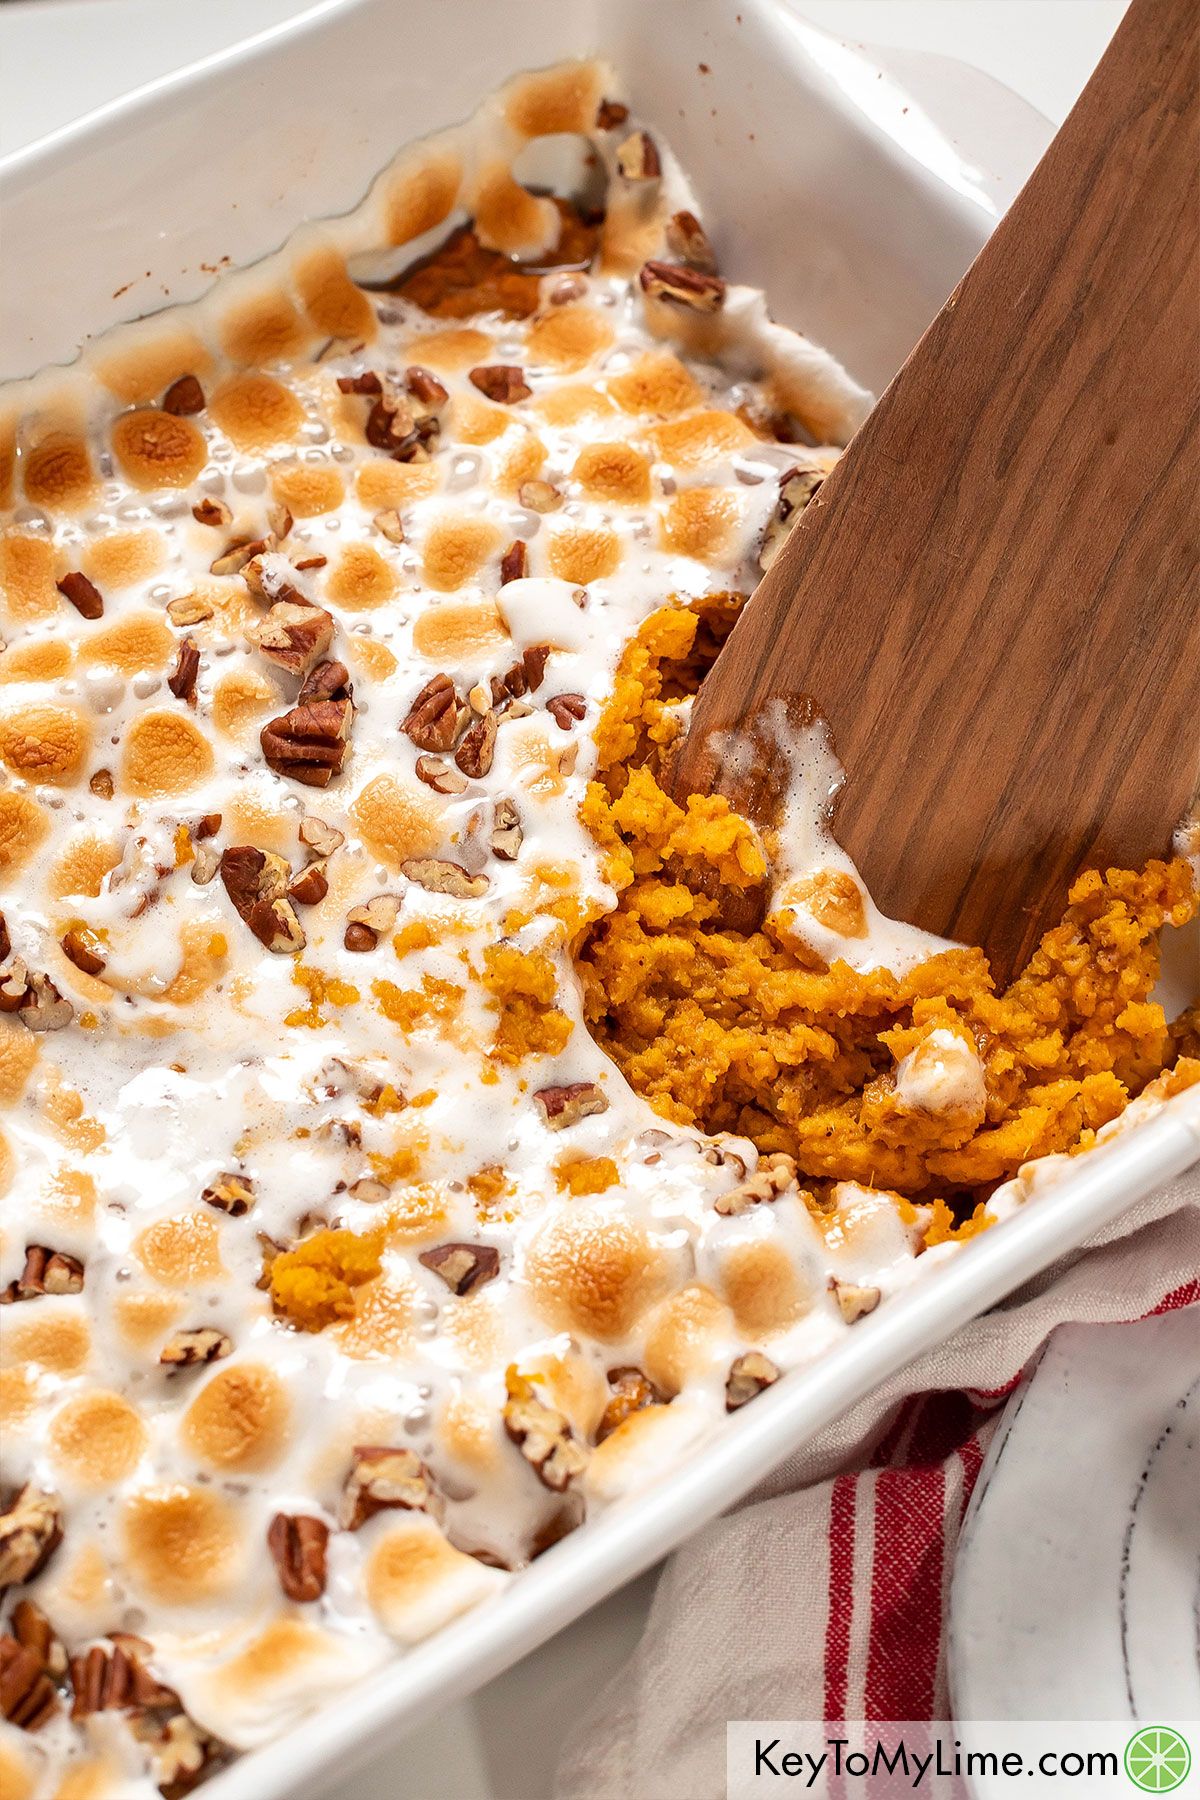 An image showing the texture of sweet potato casserole.